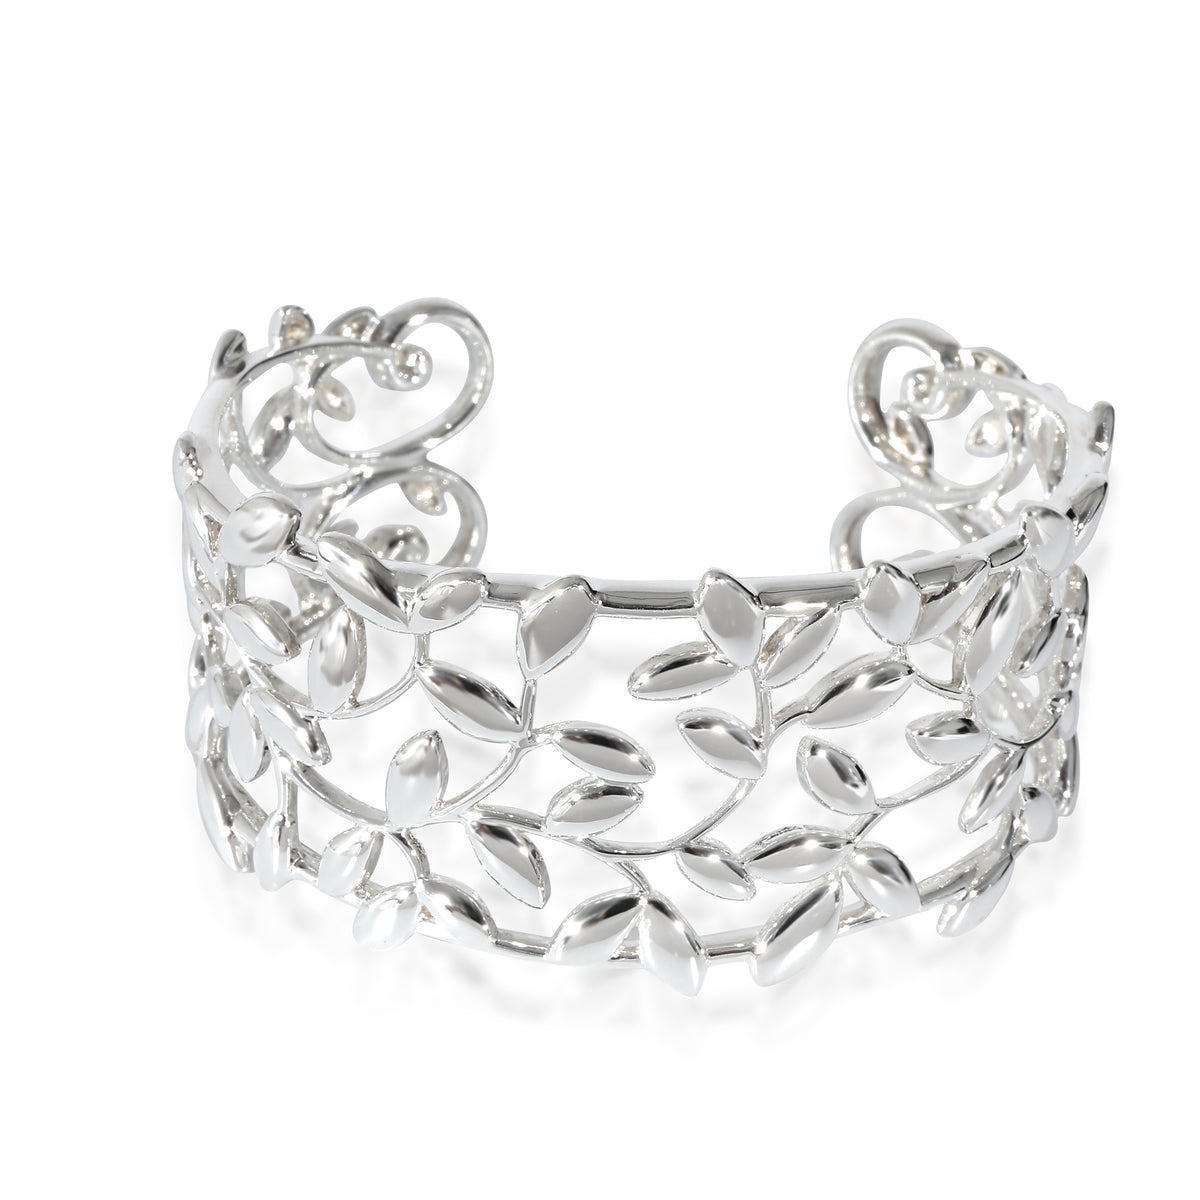 Tiffany & Co. Paloma Picasso Bracelet in Sterling Silver